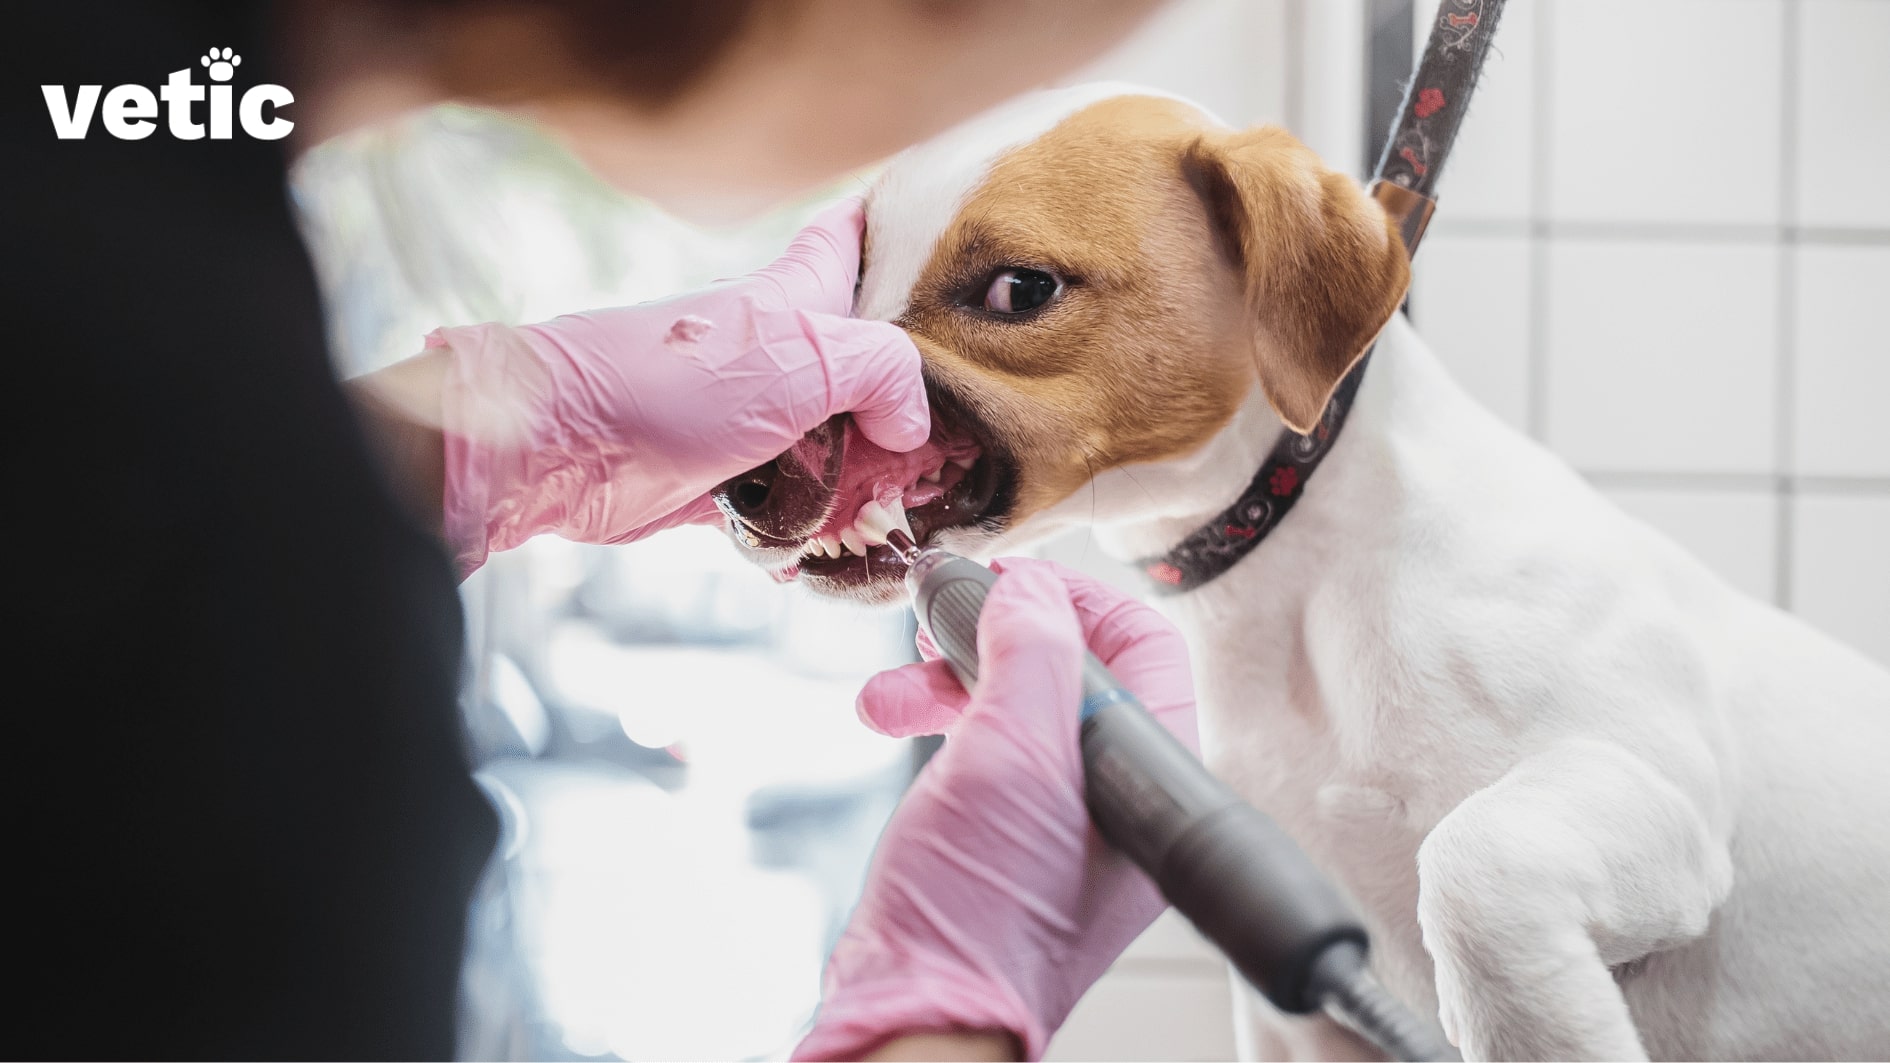 small dog, likely a Jack Russell Terrier getting their teeth cleaned professionally with a scaling tool specifically designed for dog's teeth.